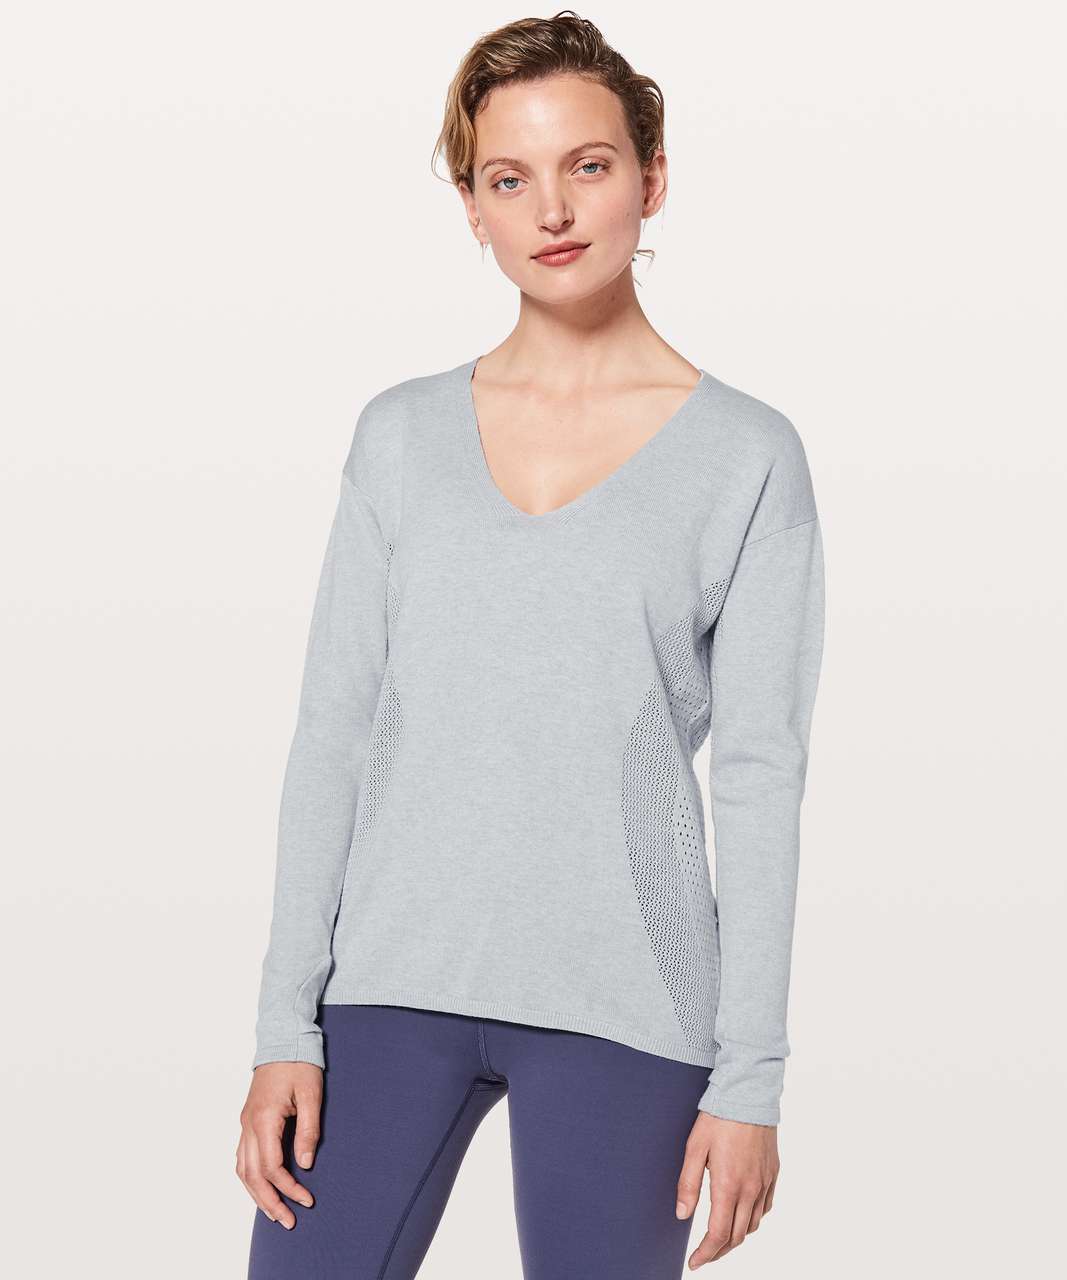 Lululemon Sweater Womens Small Knit Shirt V Neck Long Sleeve Gray Perforated